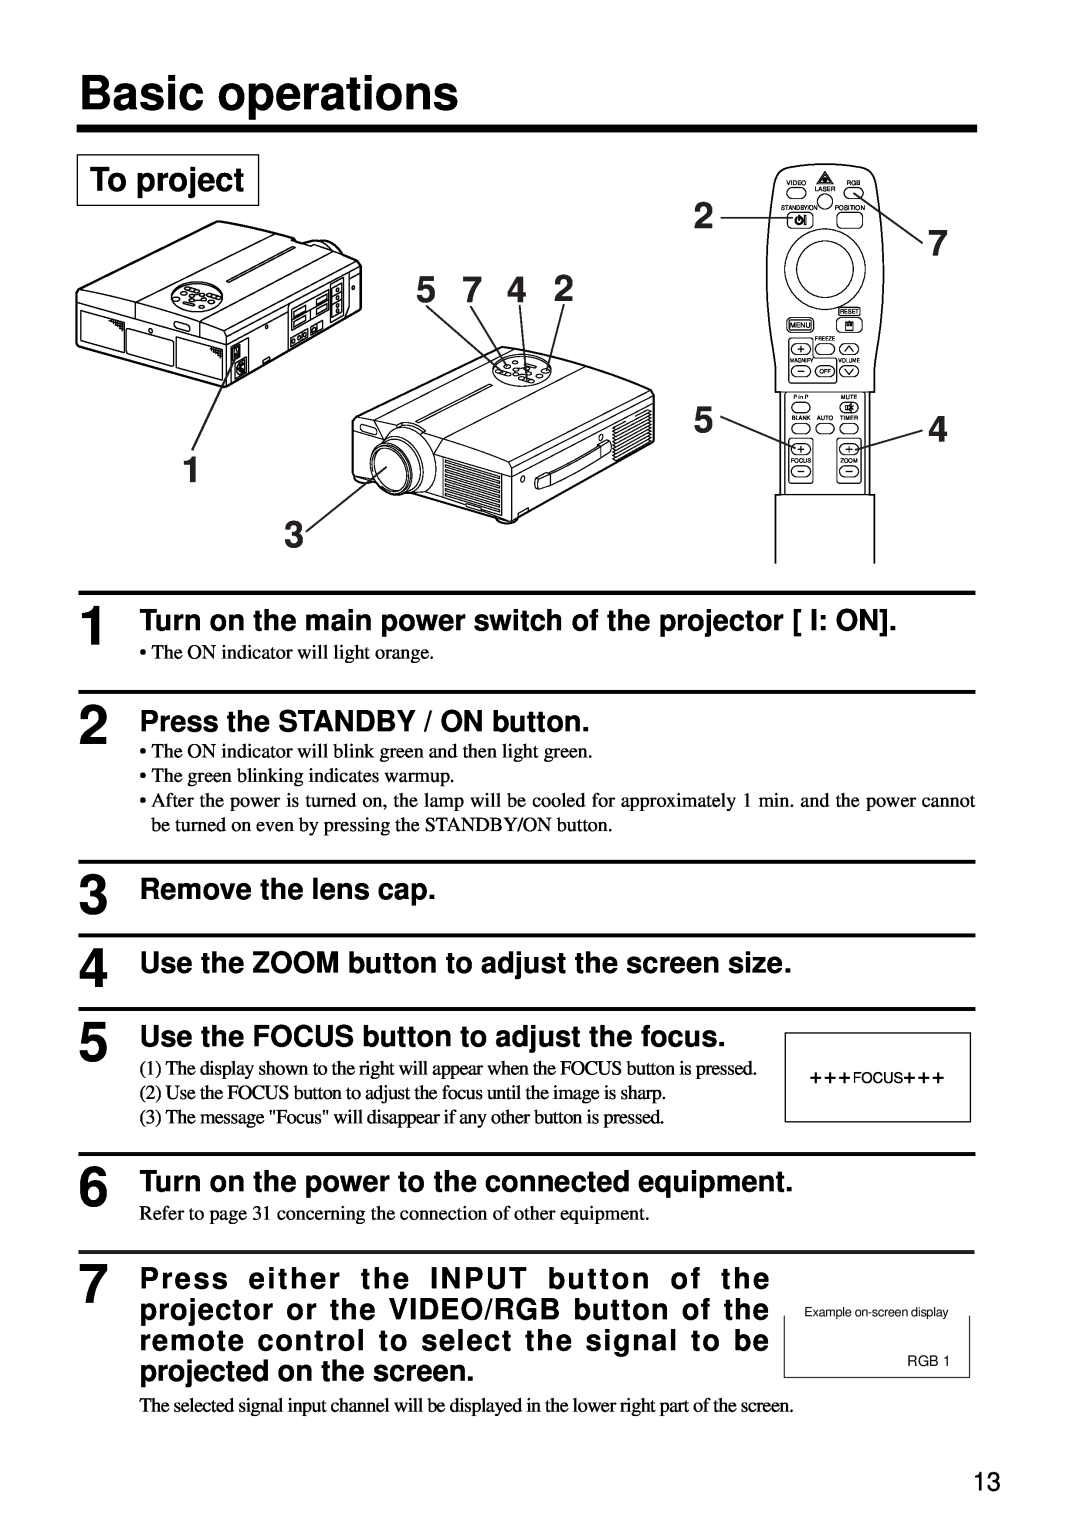 Hitachi CP-S860W user manual Basic operations, 2 5 7 4 5 3, To project, Press the STANDBY / ON button, Remove the lens cap 